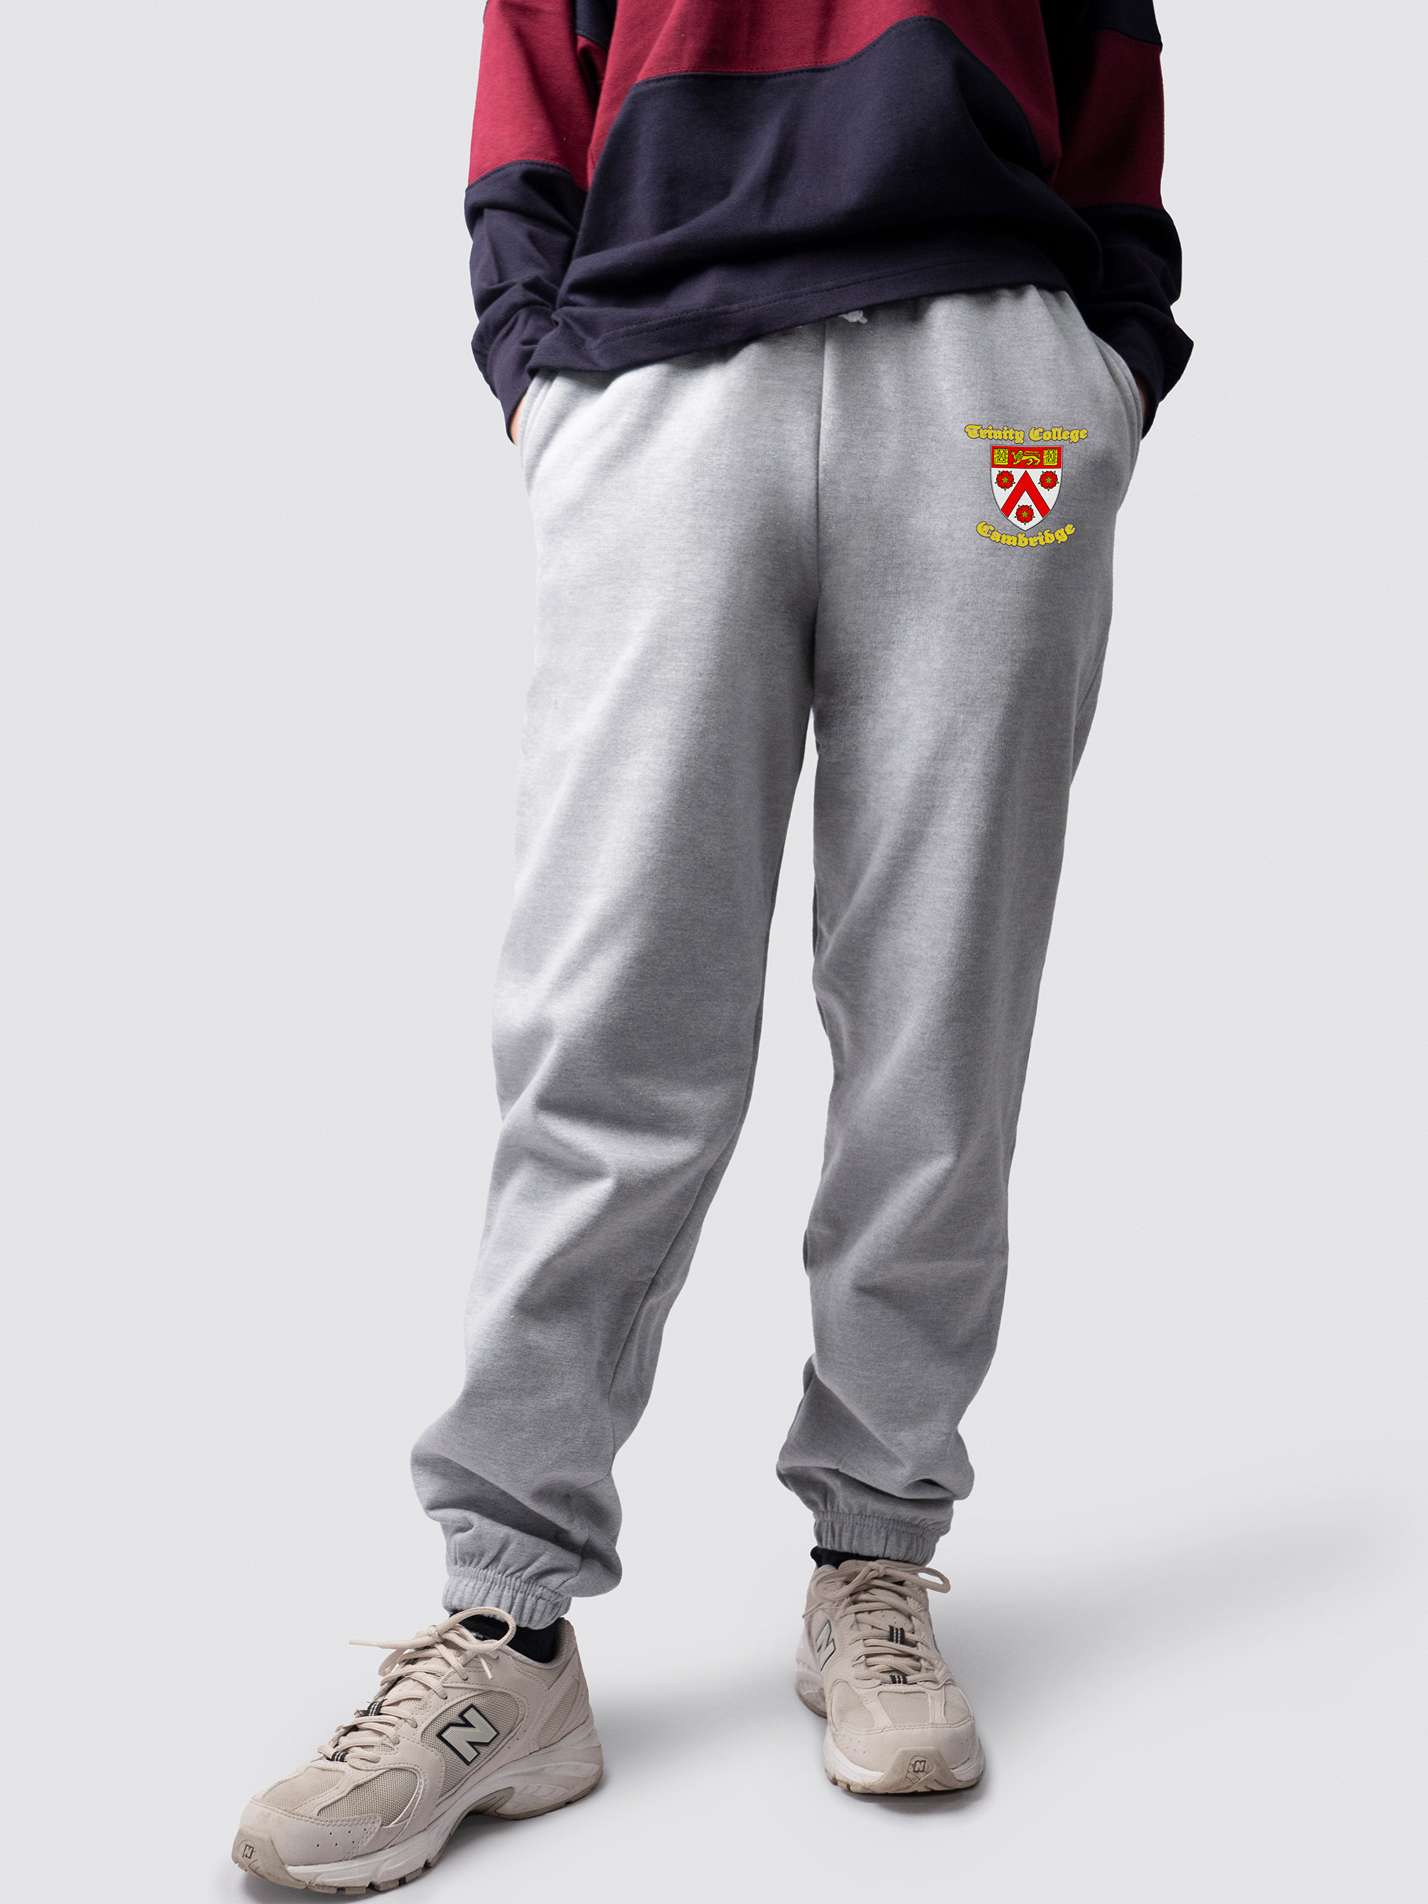 undergraduate cuffed sweatpants, made from soft cotton fabric, with Trinity logo